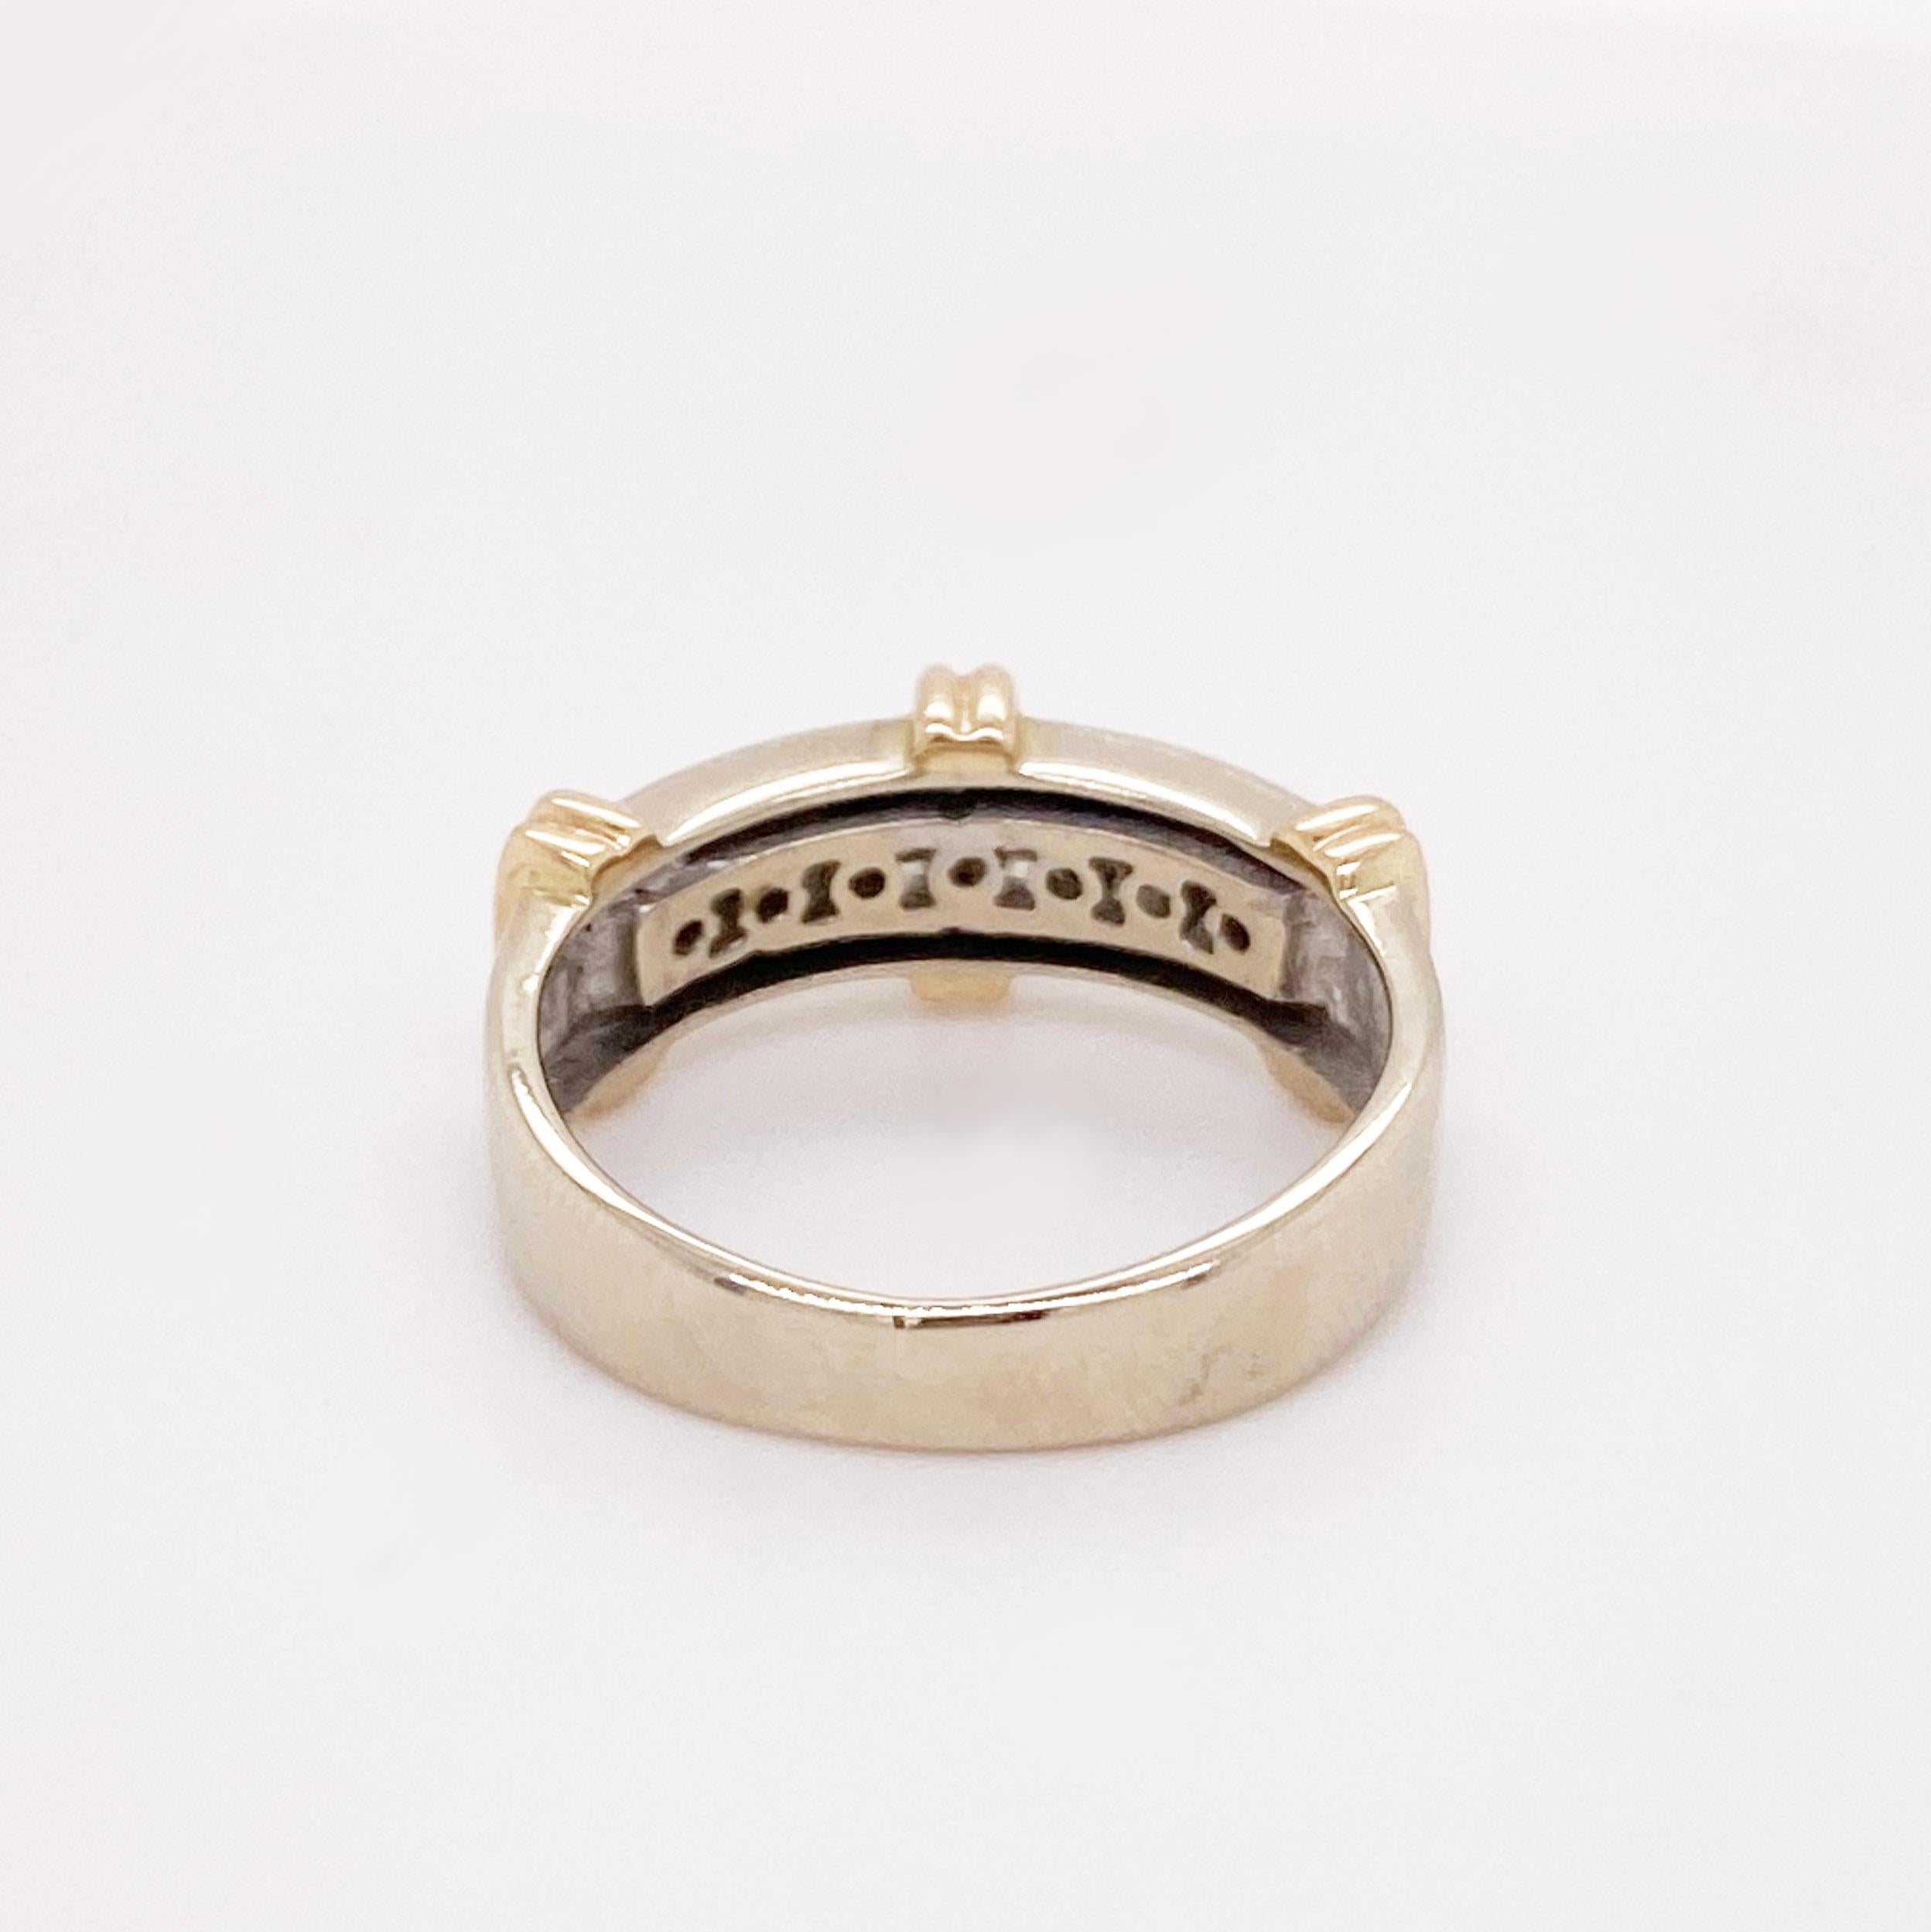 For Sale:  Channel Diamond Band, 14K Mixed Metal Ring w 7 Diamonds, Wide Band 3